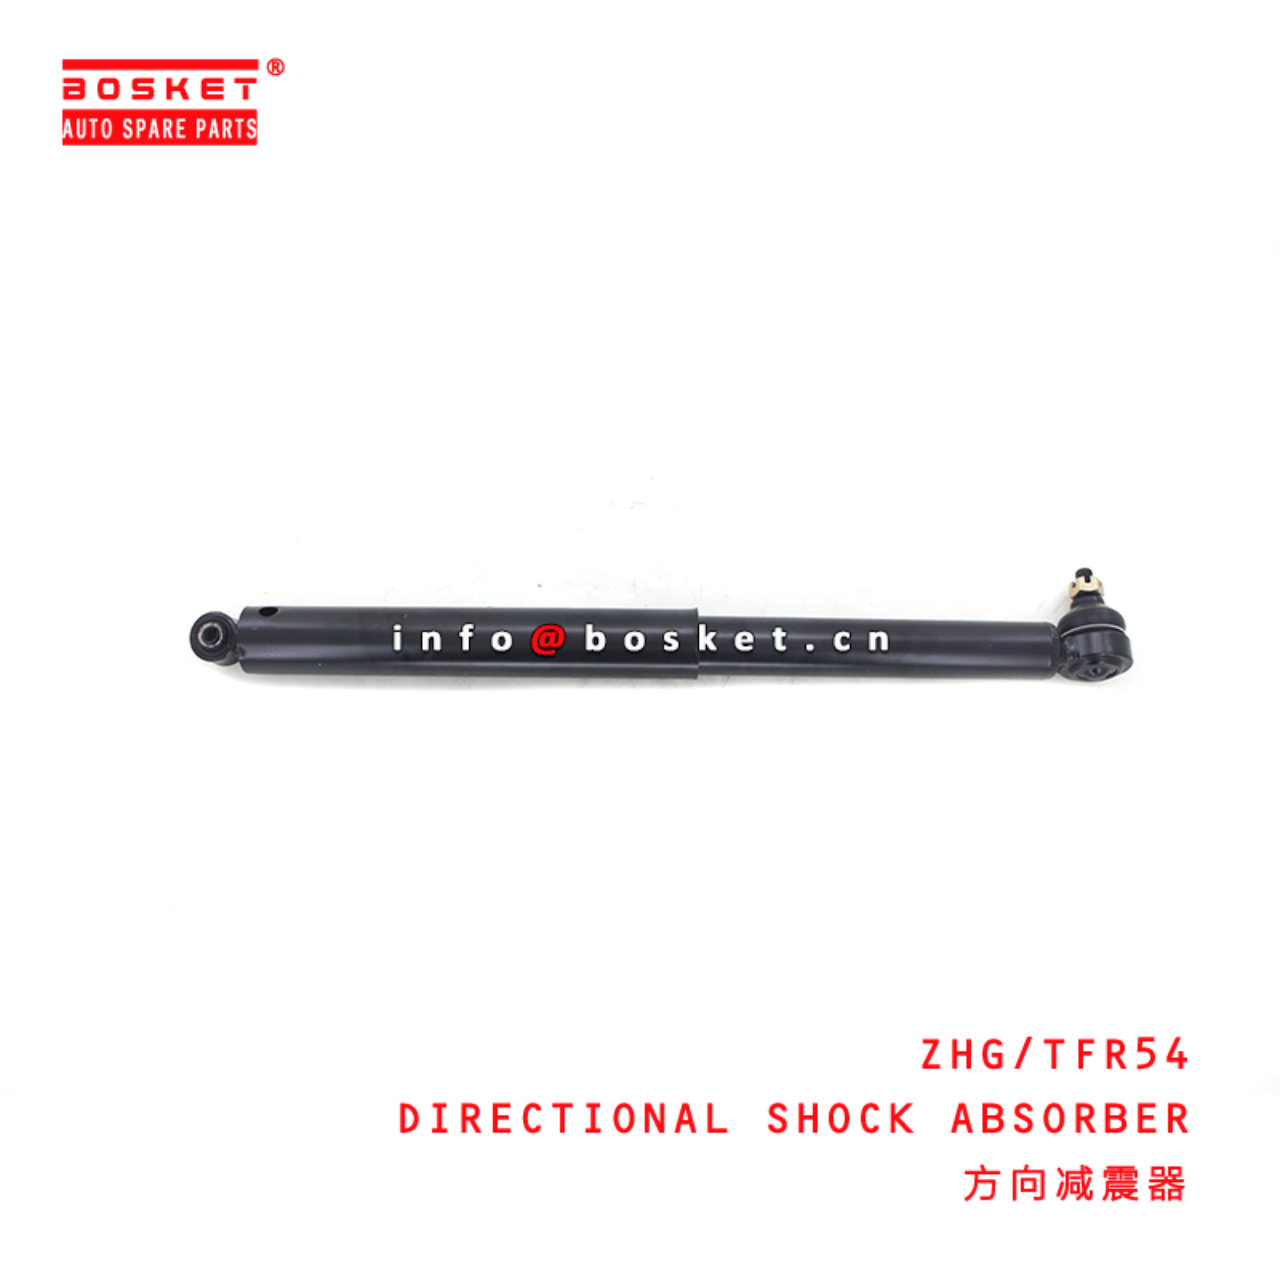  ZHG/TFR54 Directional Shock Absorber Suitable for ISUZU TFR54